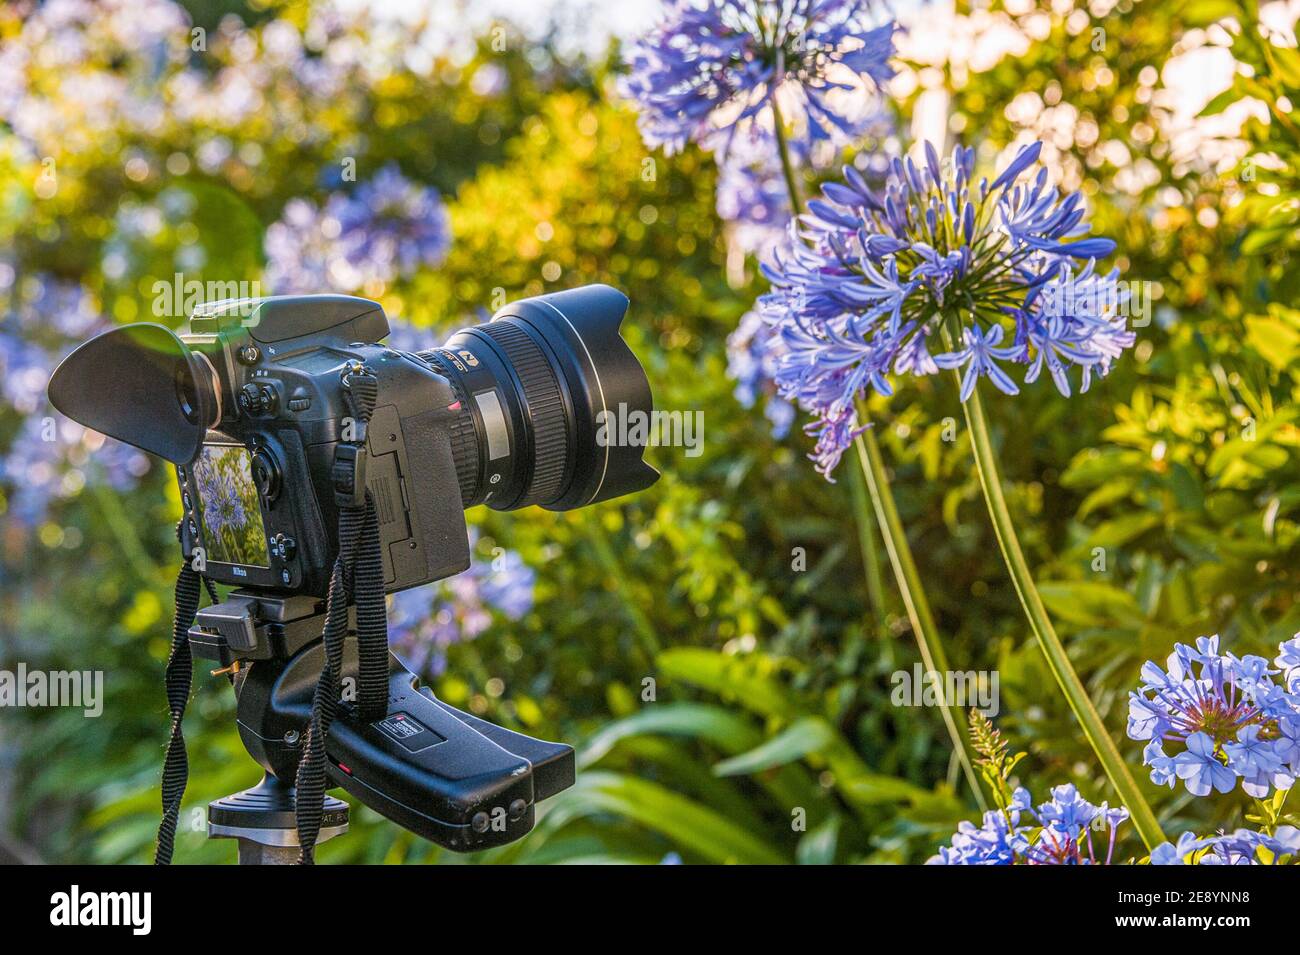 A Nikon D800 DSLR camera on a tripod, photographing a close up of an Agapanthus (subfamily Agapanthoideae) flower. Stock Photo